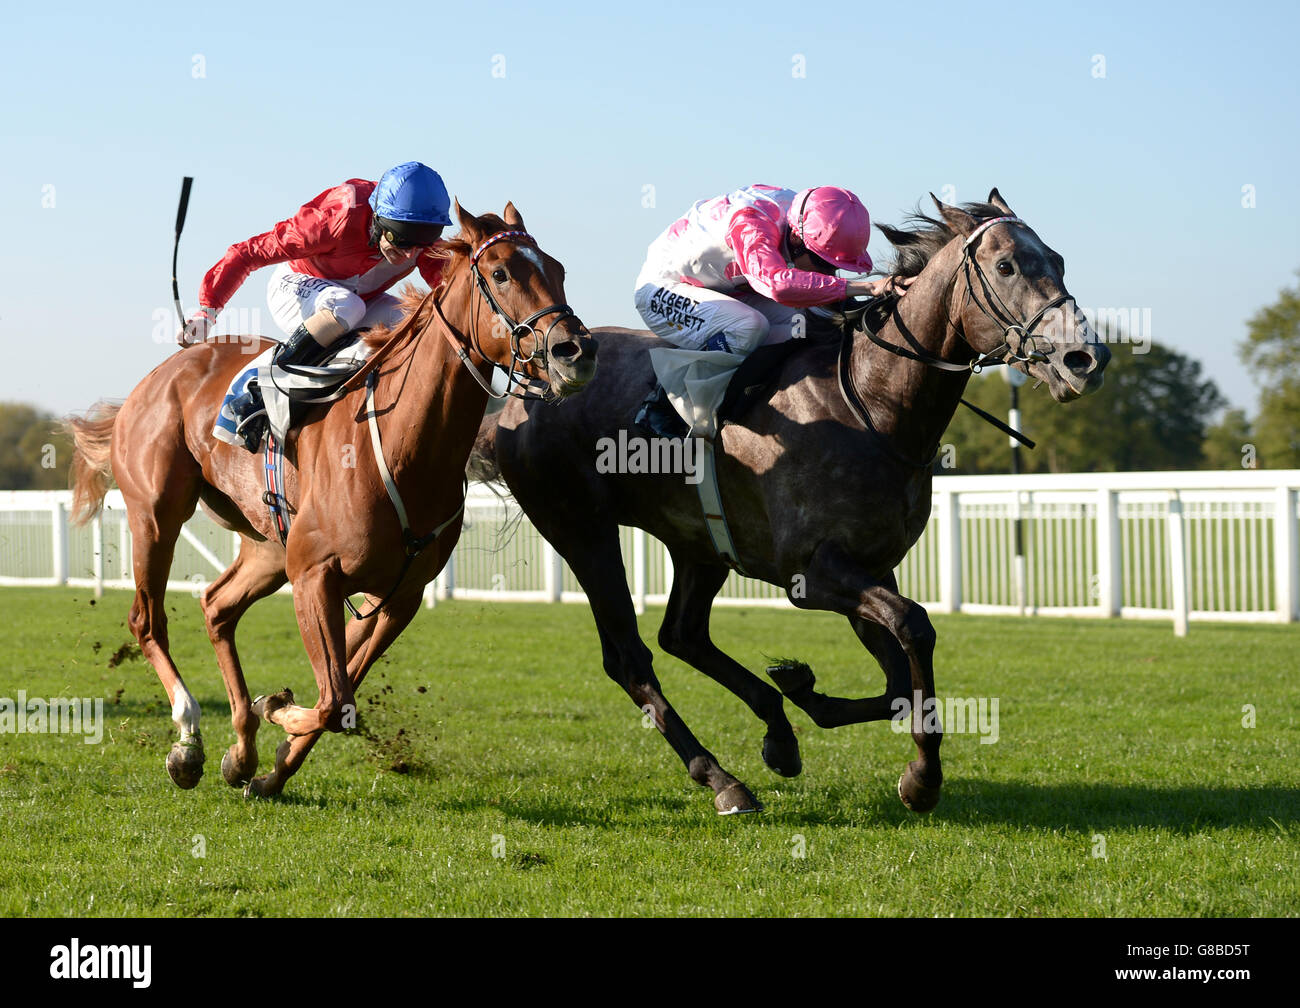 Optima Petamus (right) ridden by Jamie Spencer wins the MPM Flooring Ltd Maiden Stakes from Noblest (left) ridden by Joe Fanning at Windsor Racecourse. Stock Photo